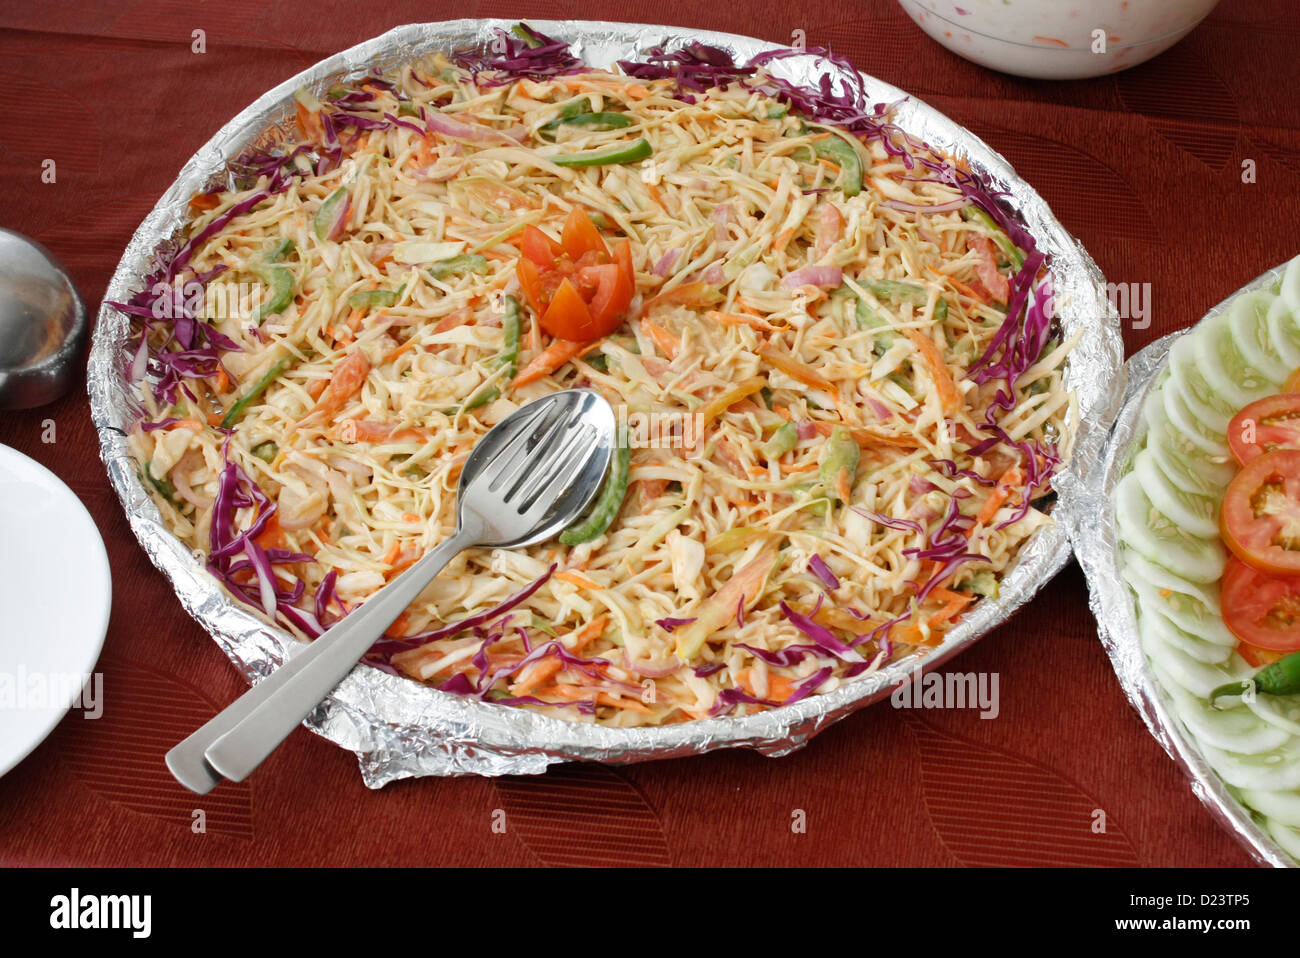 A decorated salad dish arranged on a plate Stock Photo